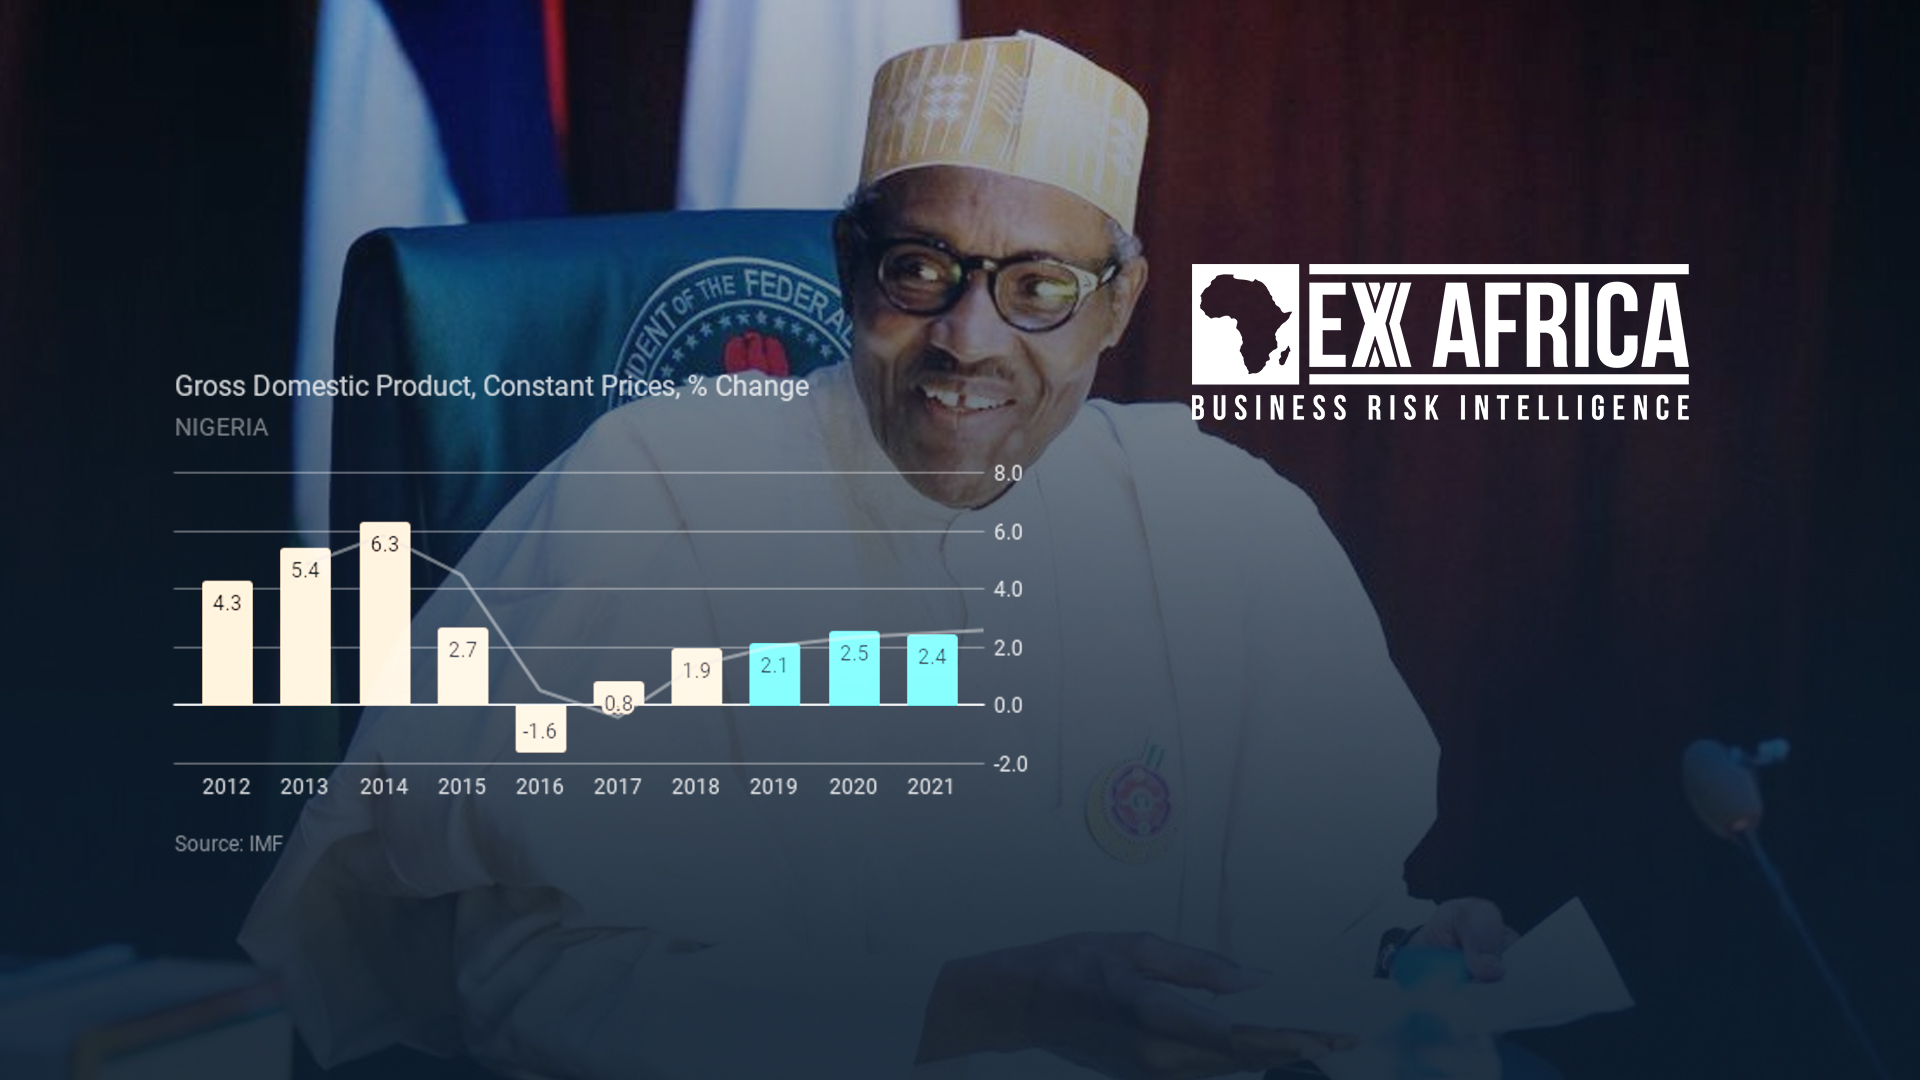 NIGERIA: OUTLOOK FOR PRESIDENT BUHARI IN HIS SECOND TERM